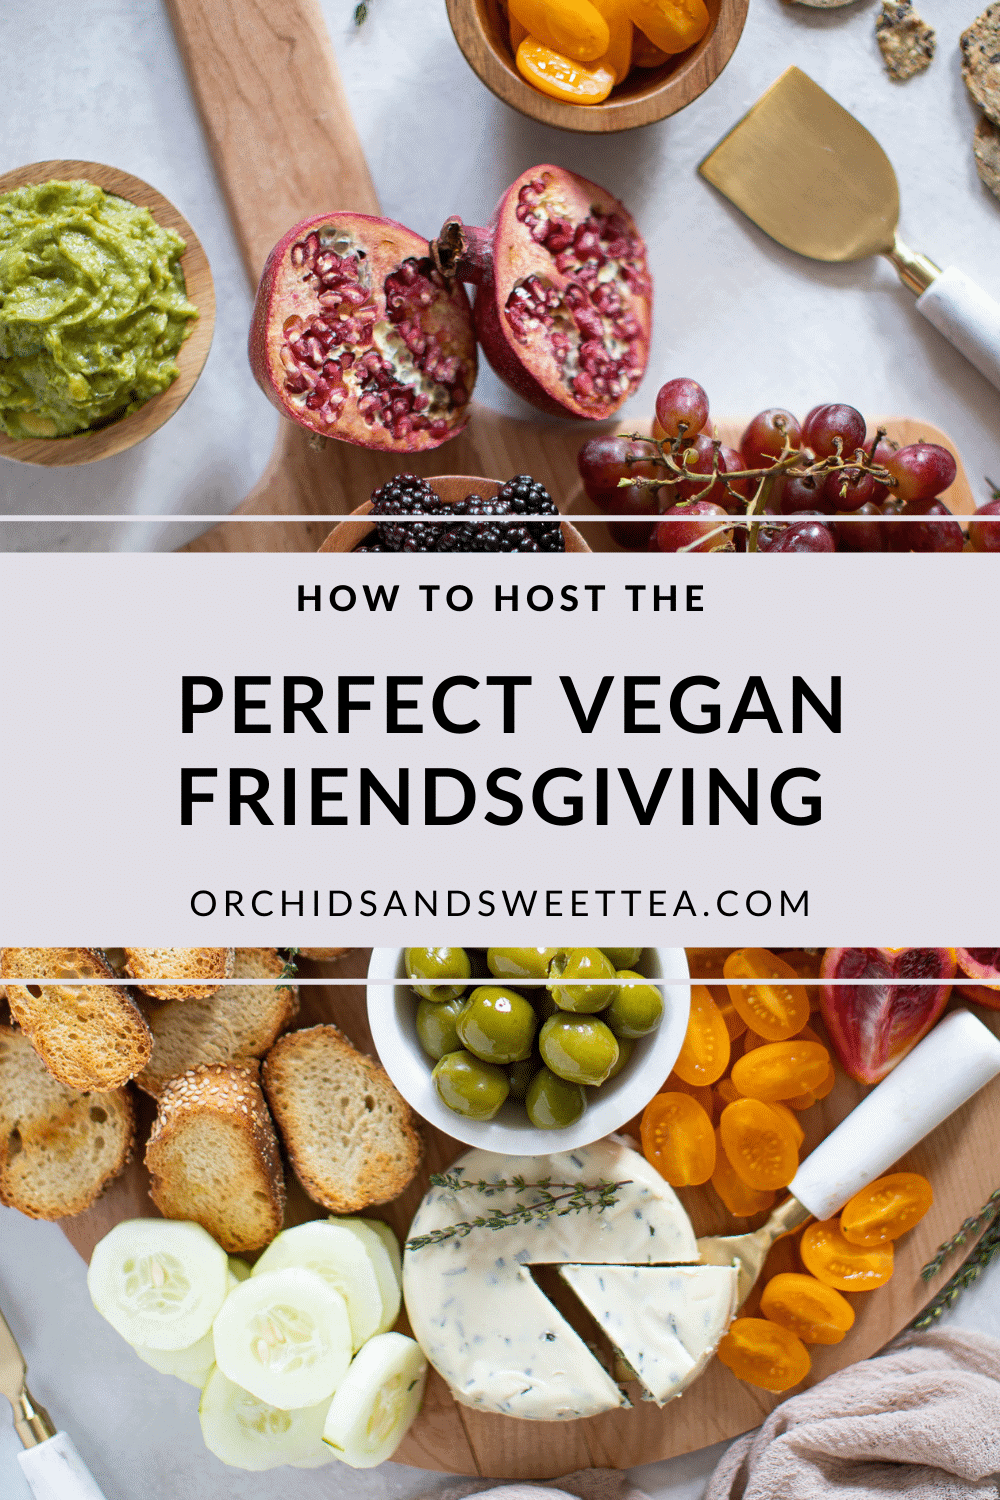 How to Host the Perfect Vegan Friendsgiving